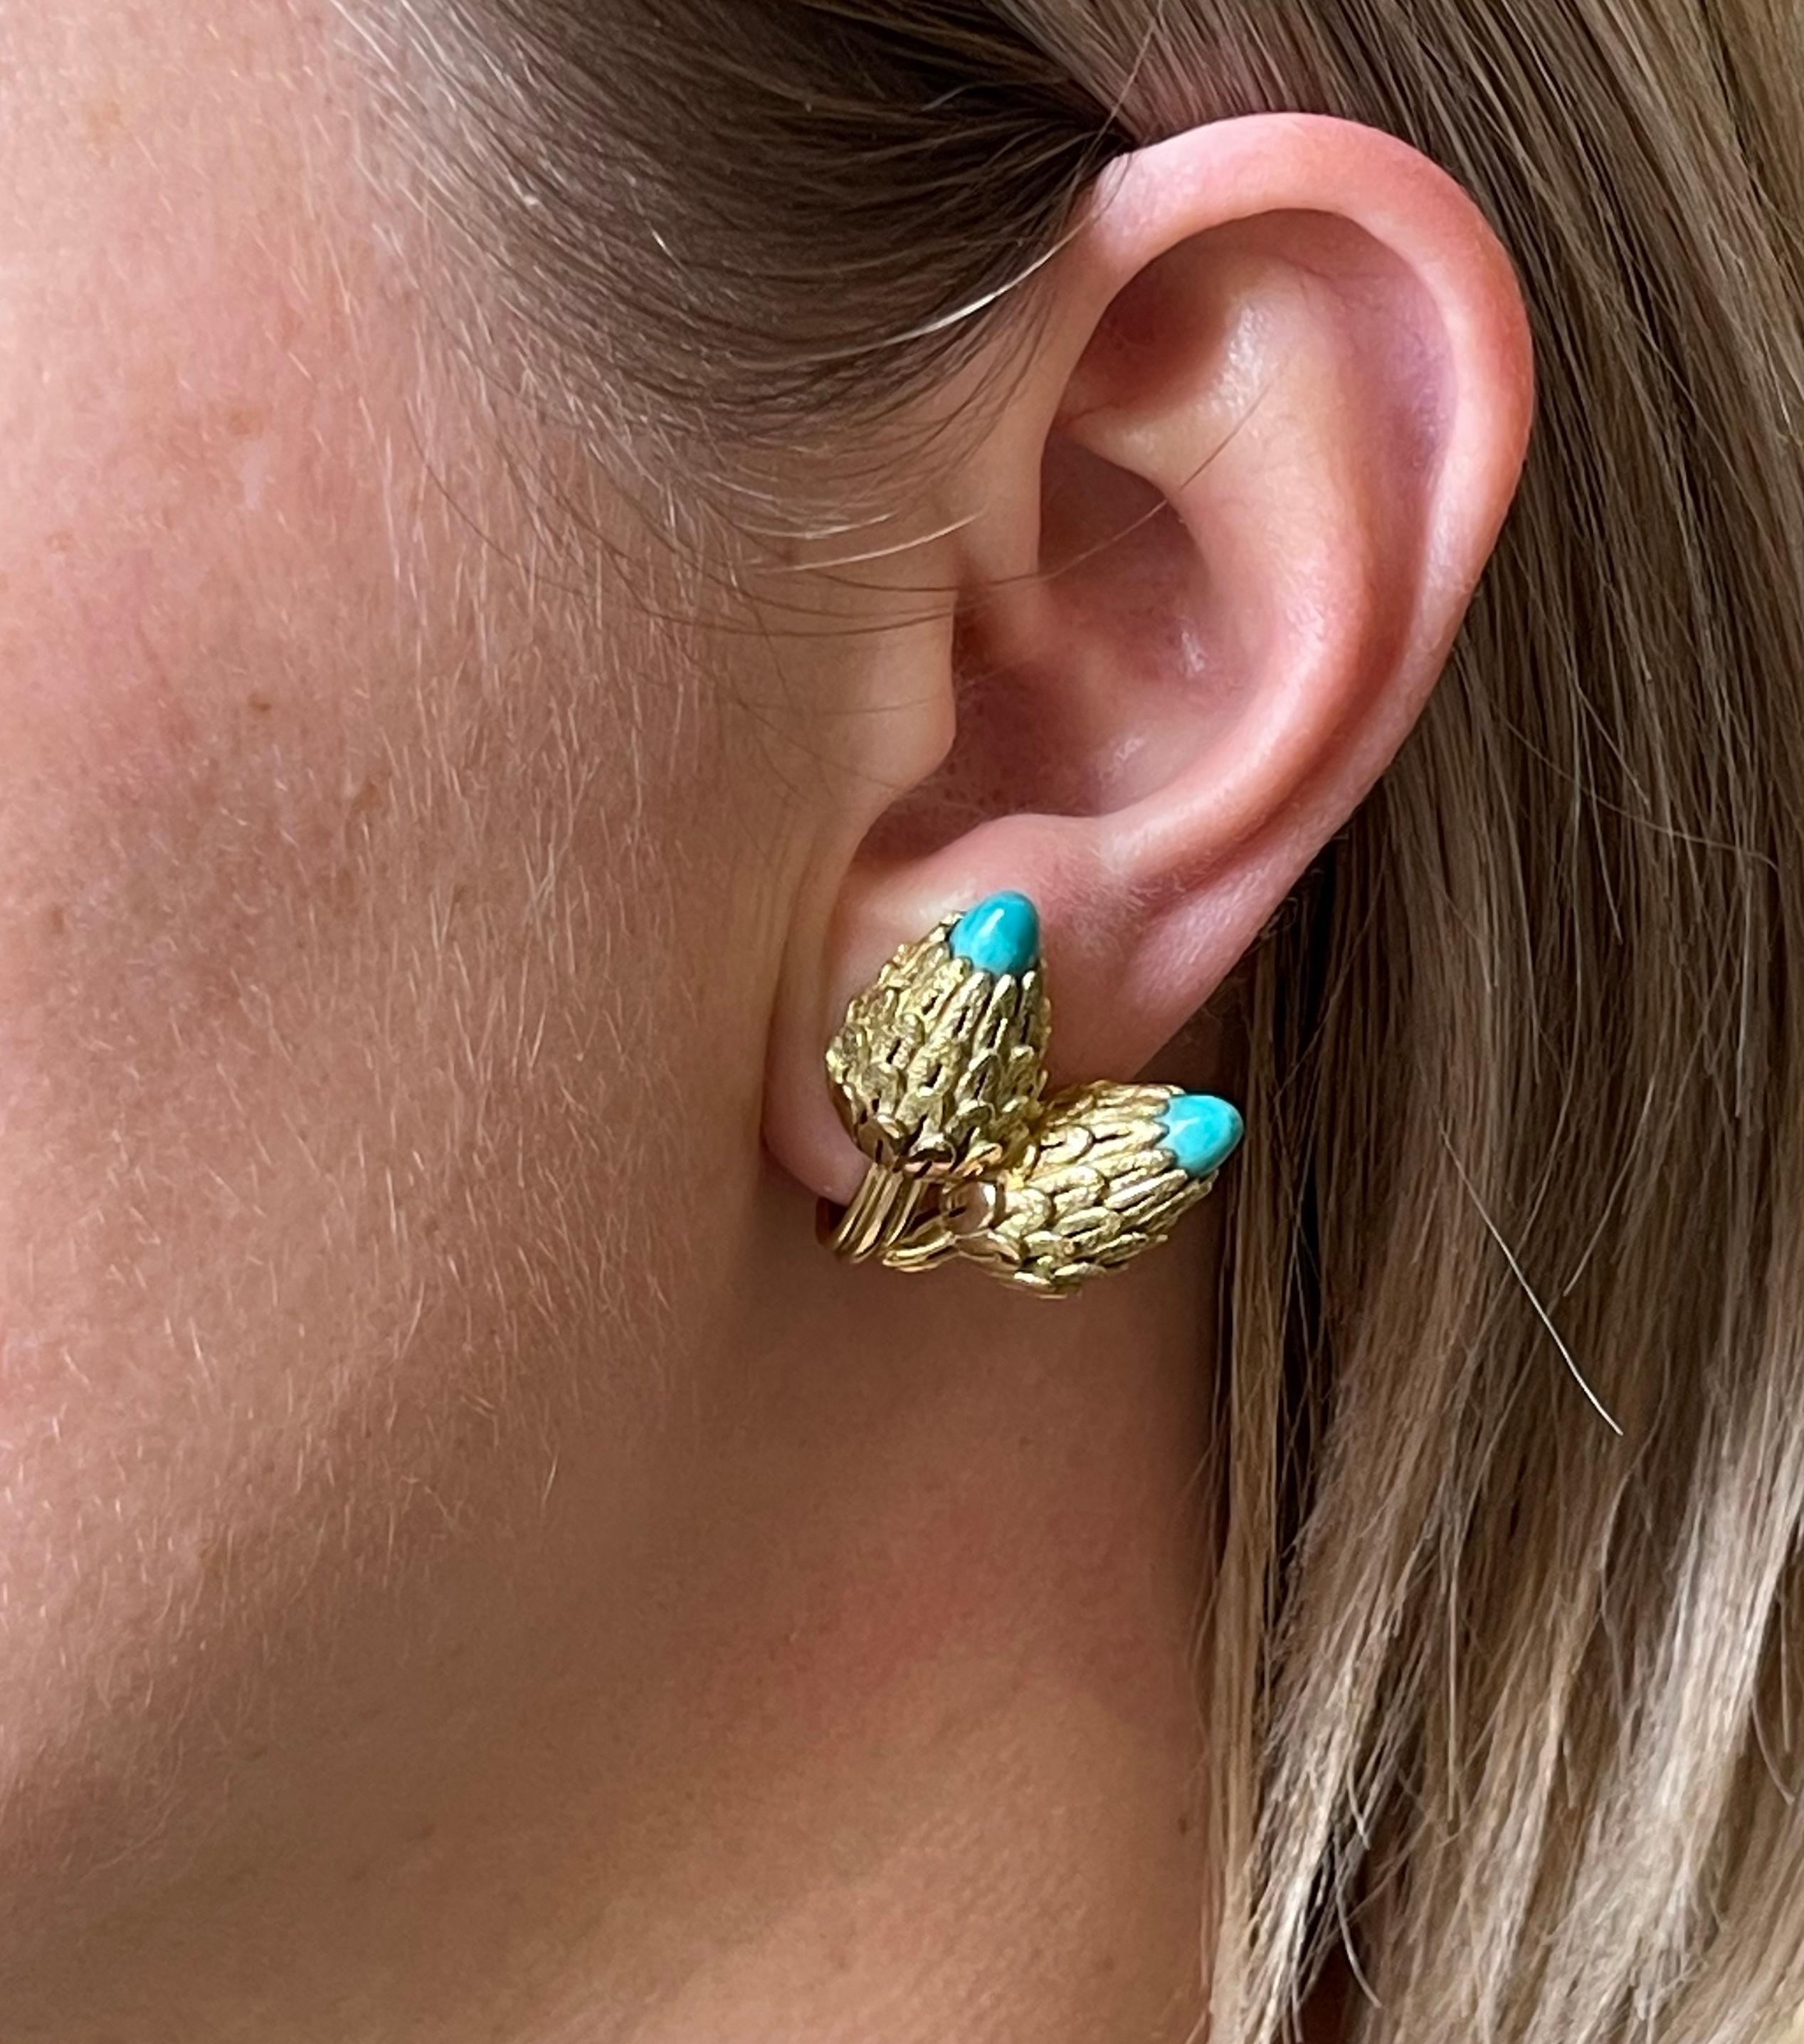 Pair of vintage French made 18k gold acorn earrings, with turquoise gemstones. Earrings measure 1 1/8